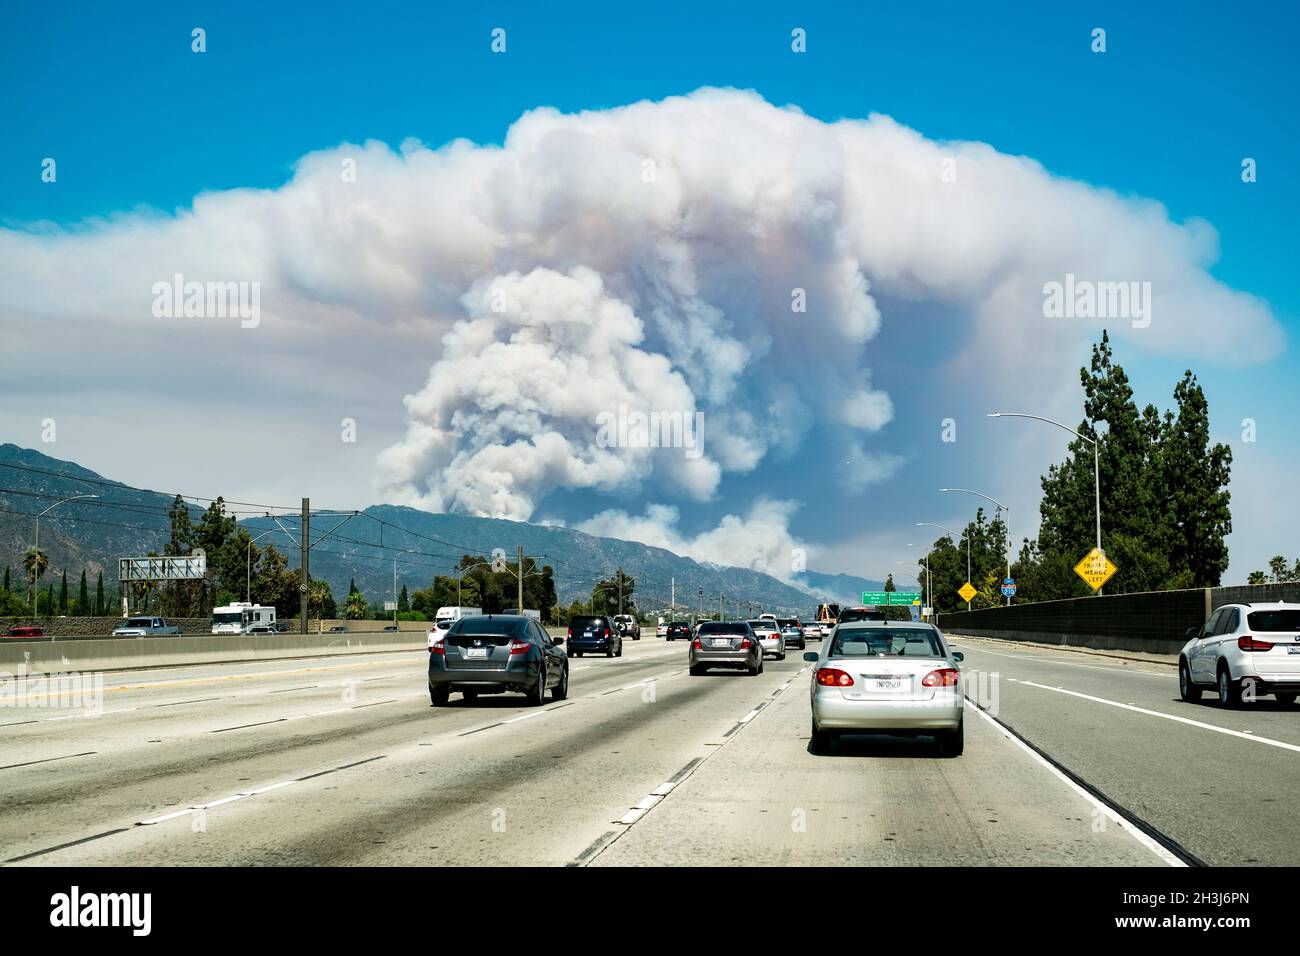 The beginning of a huge wildfire in the San Gabriel mountains, the Complex Fire, on June 20, 2016 taken from the 210 freeway in Pasadena, California Stock Photo